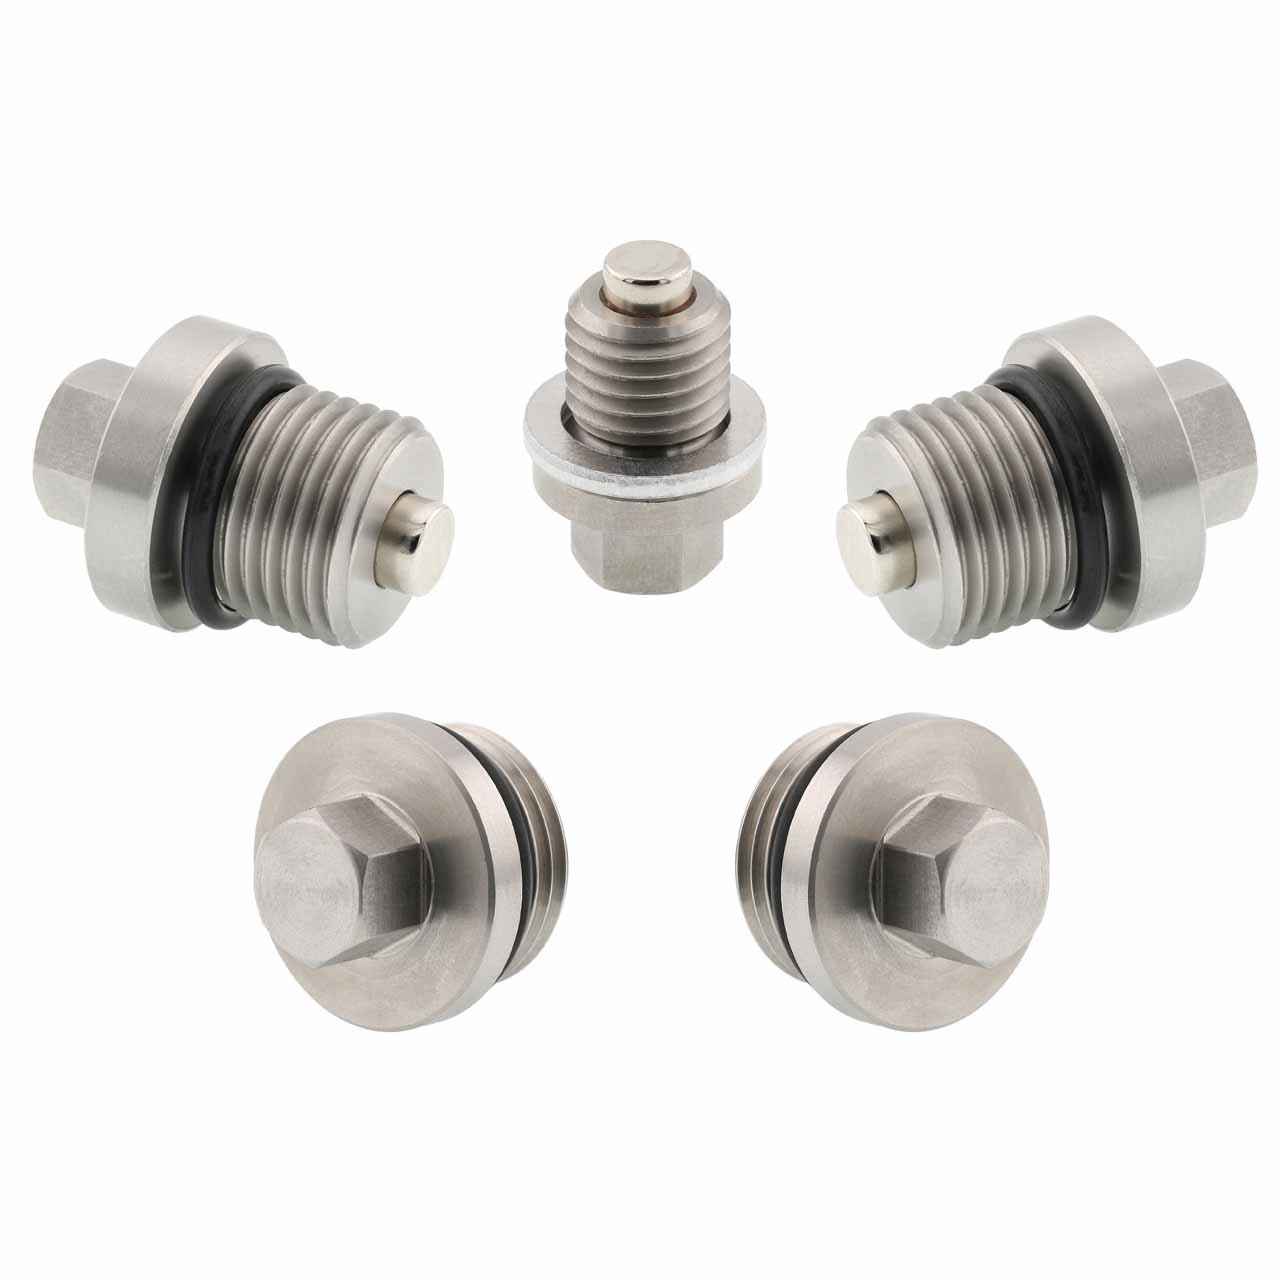 Polaris RZR S4 900 EPS Magnetic Oil Drain Plug Kit - 2018 - Engine, Transmission, Differential - Made In USA